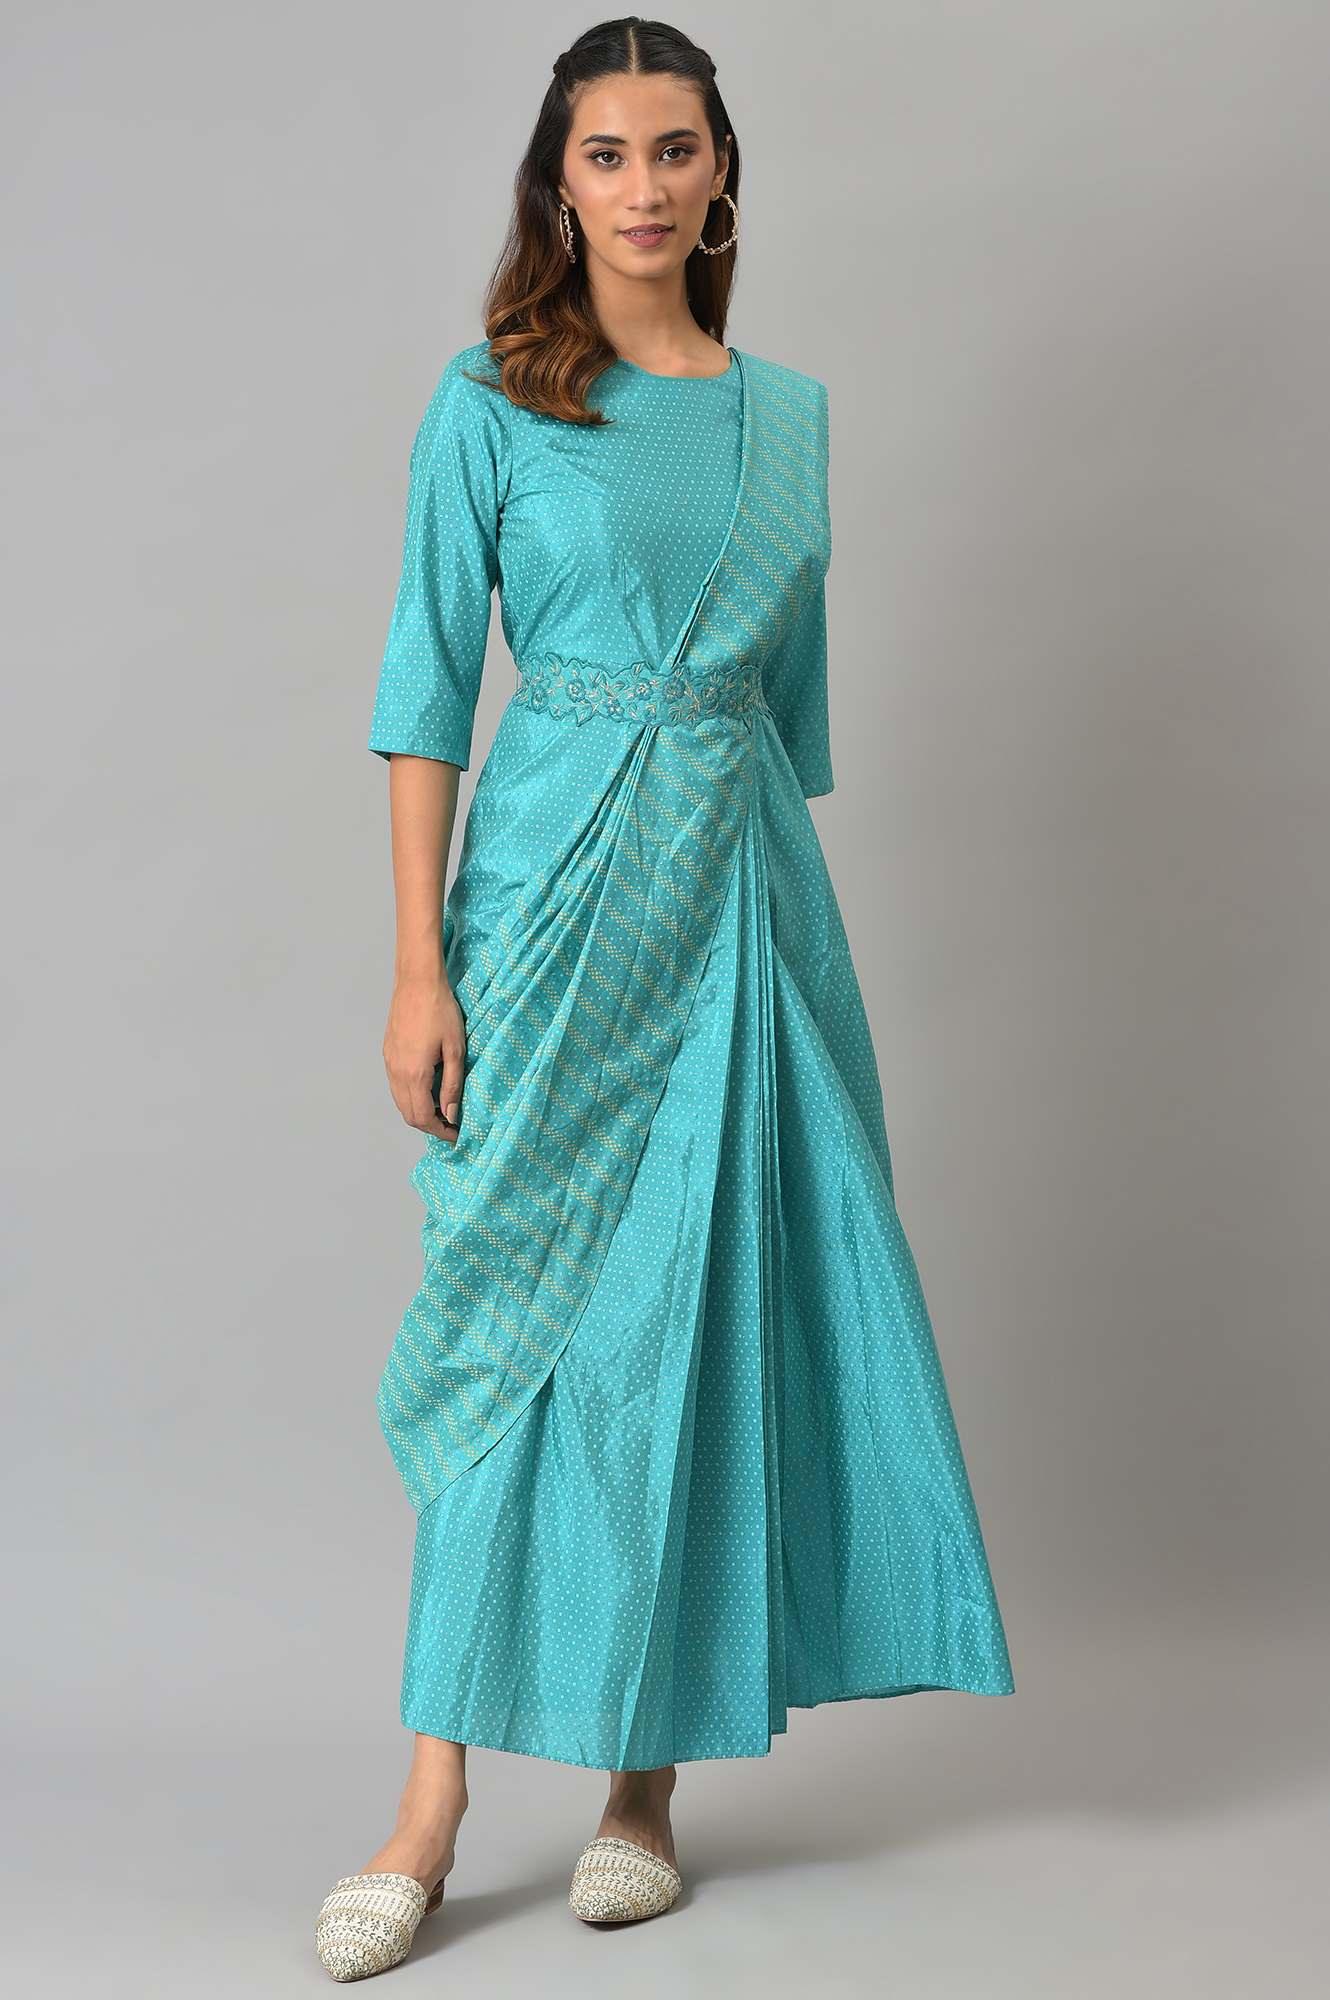 Teal Insta Saree Dress With Embroidered Belt - wforwoman